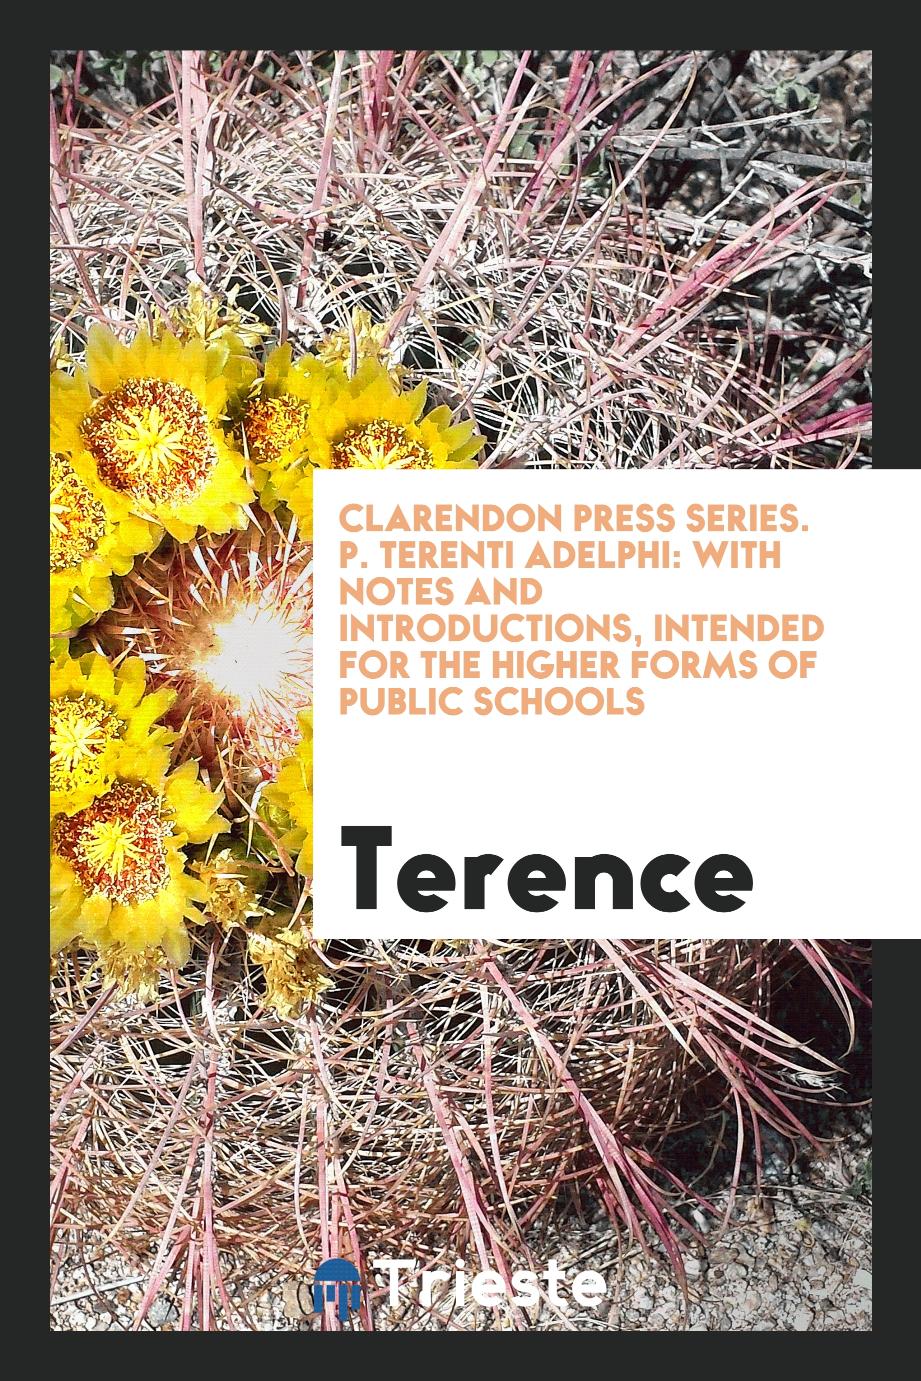 Clarendon Press Series. P. Terenti Adelphi: With Notes and Introductions, Intended for the Higher Forms of Public Schools